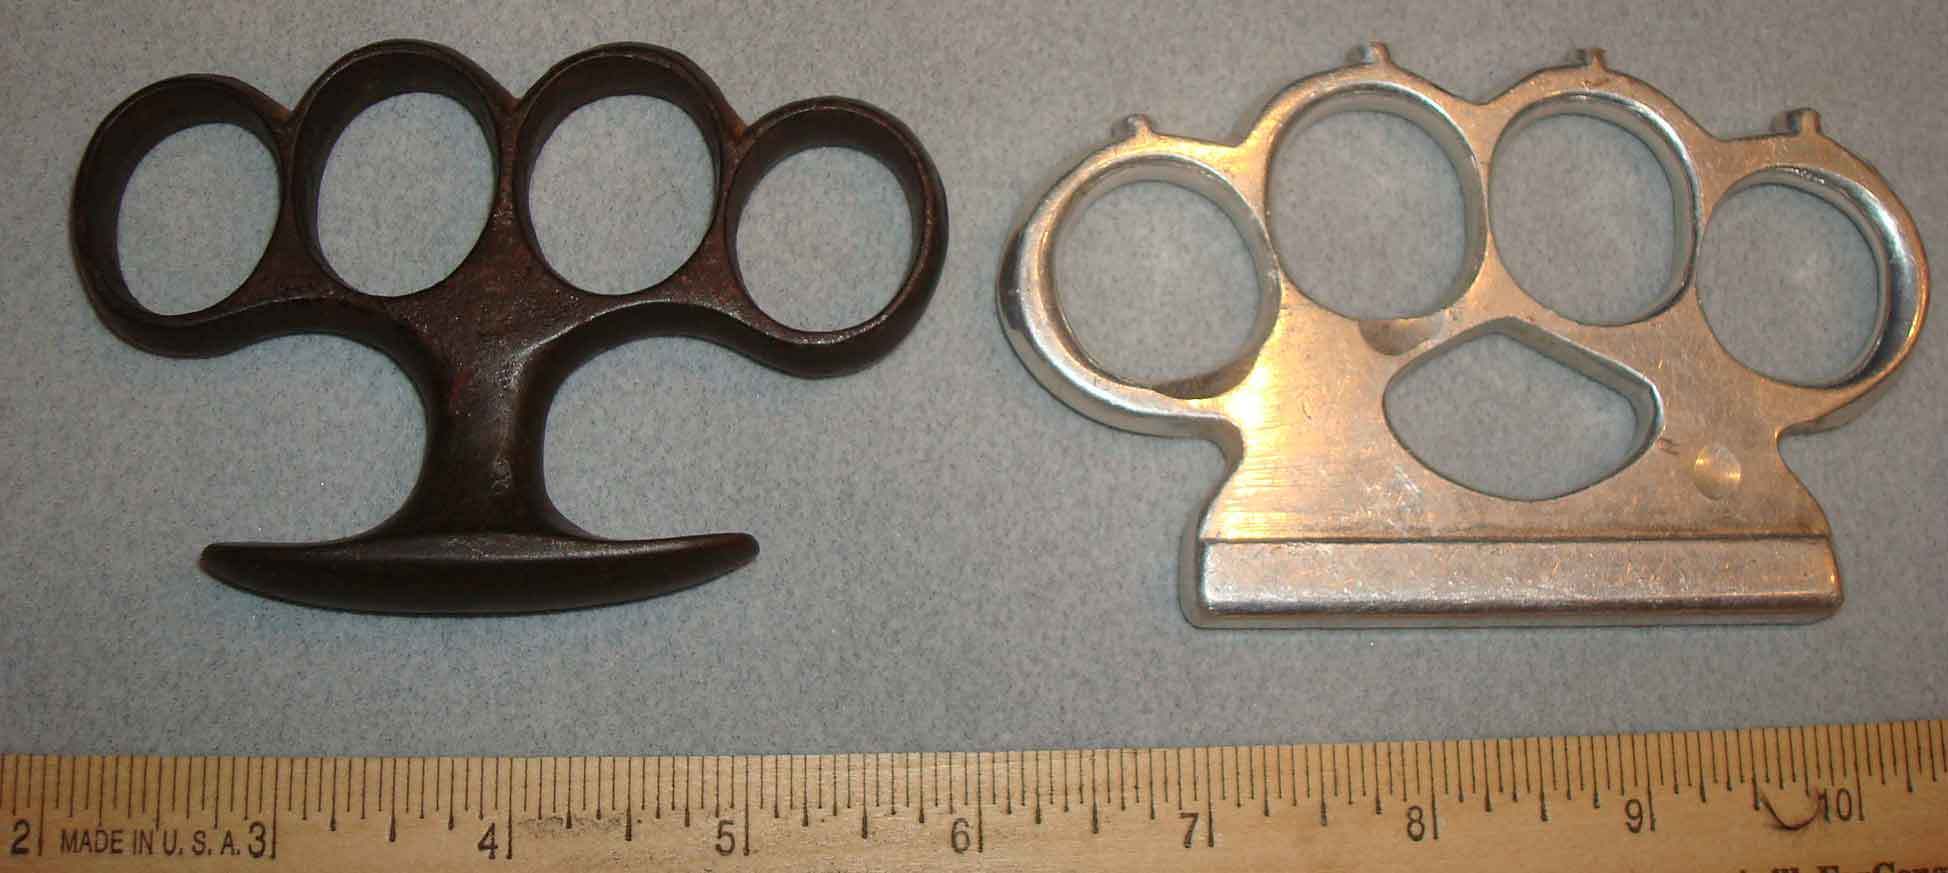 Brass Knuckles for Sale - Can I Buy One Legally?